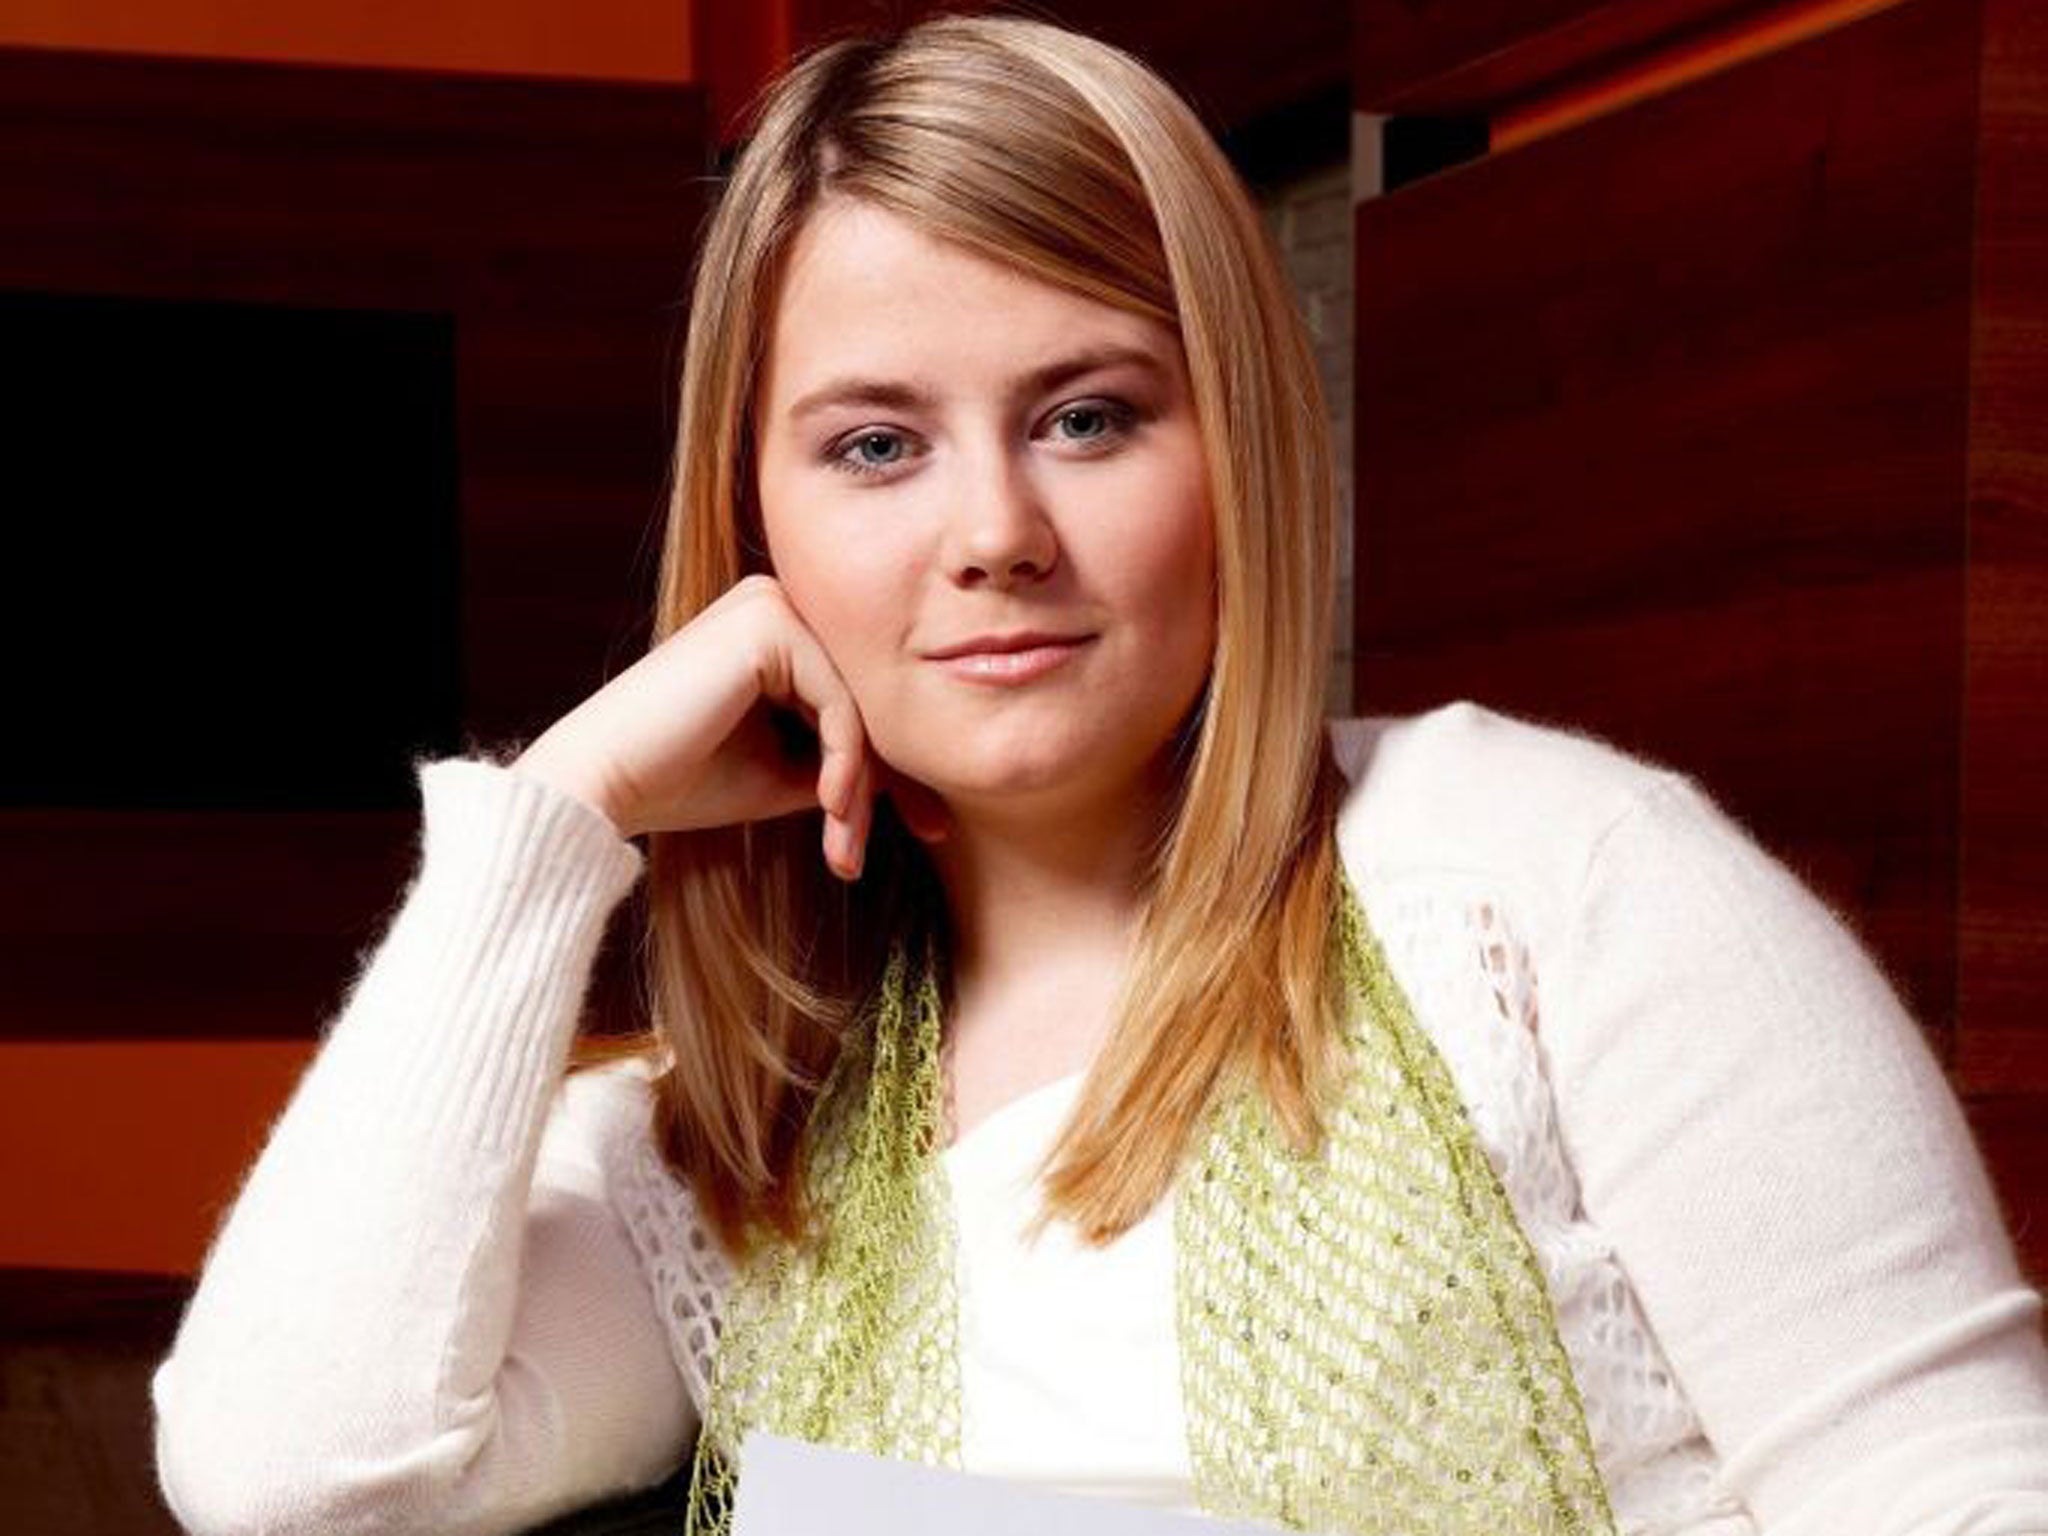 Natasha Kampusch said she now felt ‘strong enough to tell the full story’